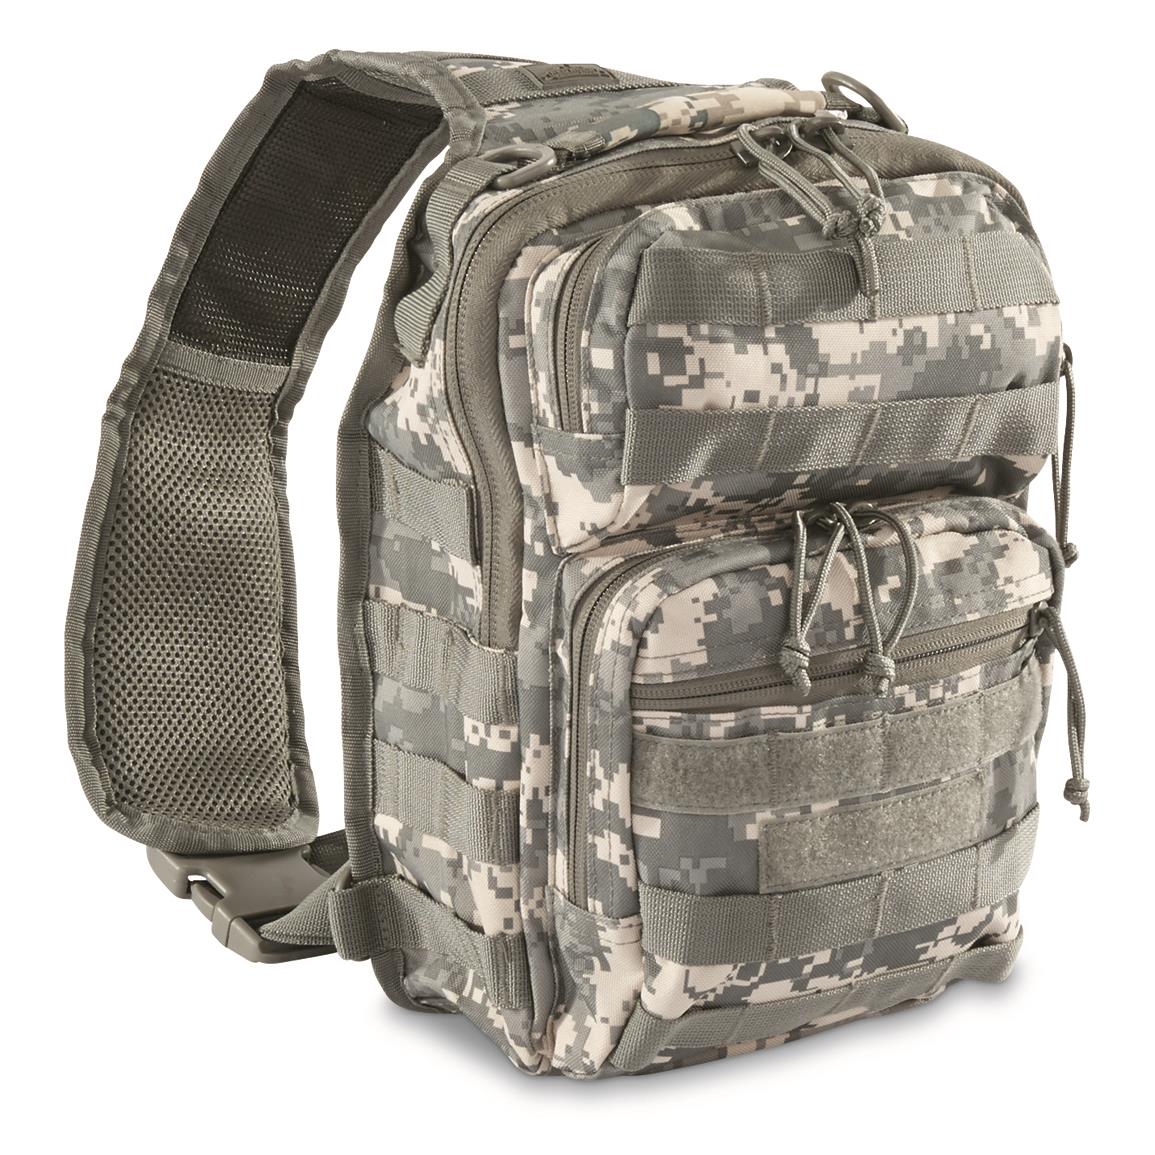 Red Rock Outdoor Gear Rover Sling Bag - 182449, Military Style Backpacks & Bags at Sportsman&#39;s Guide